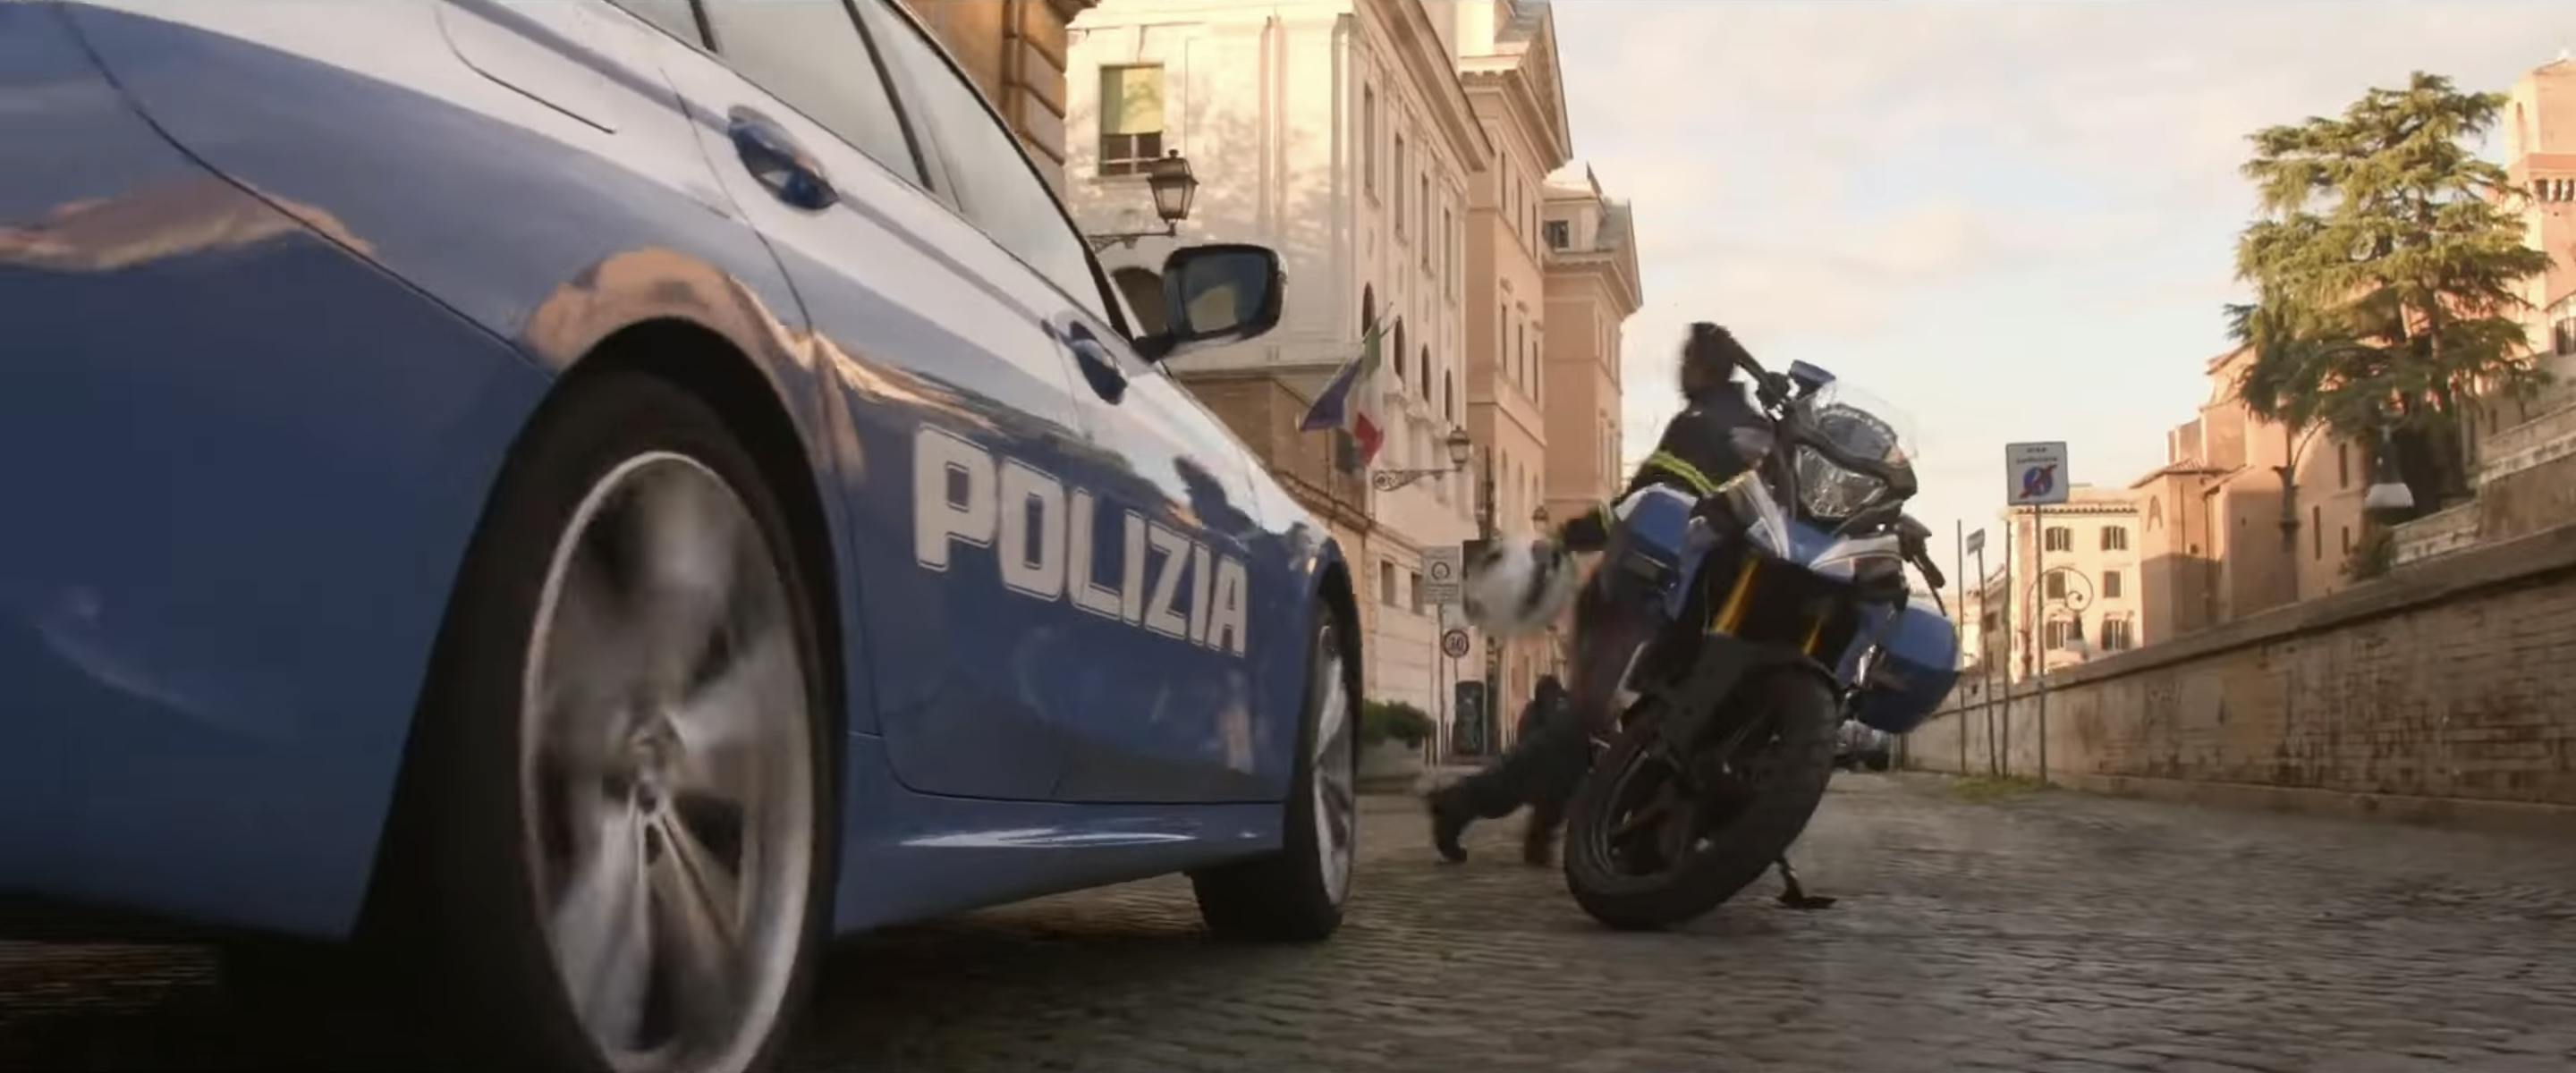 Mission Impossible italian police street action scene